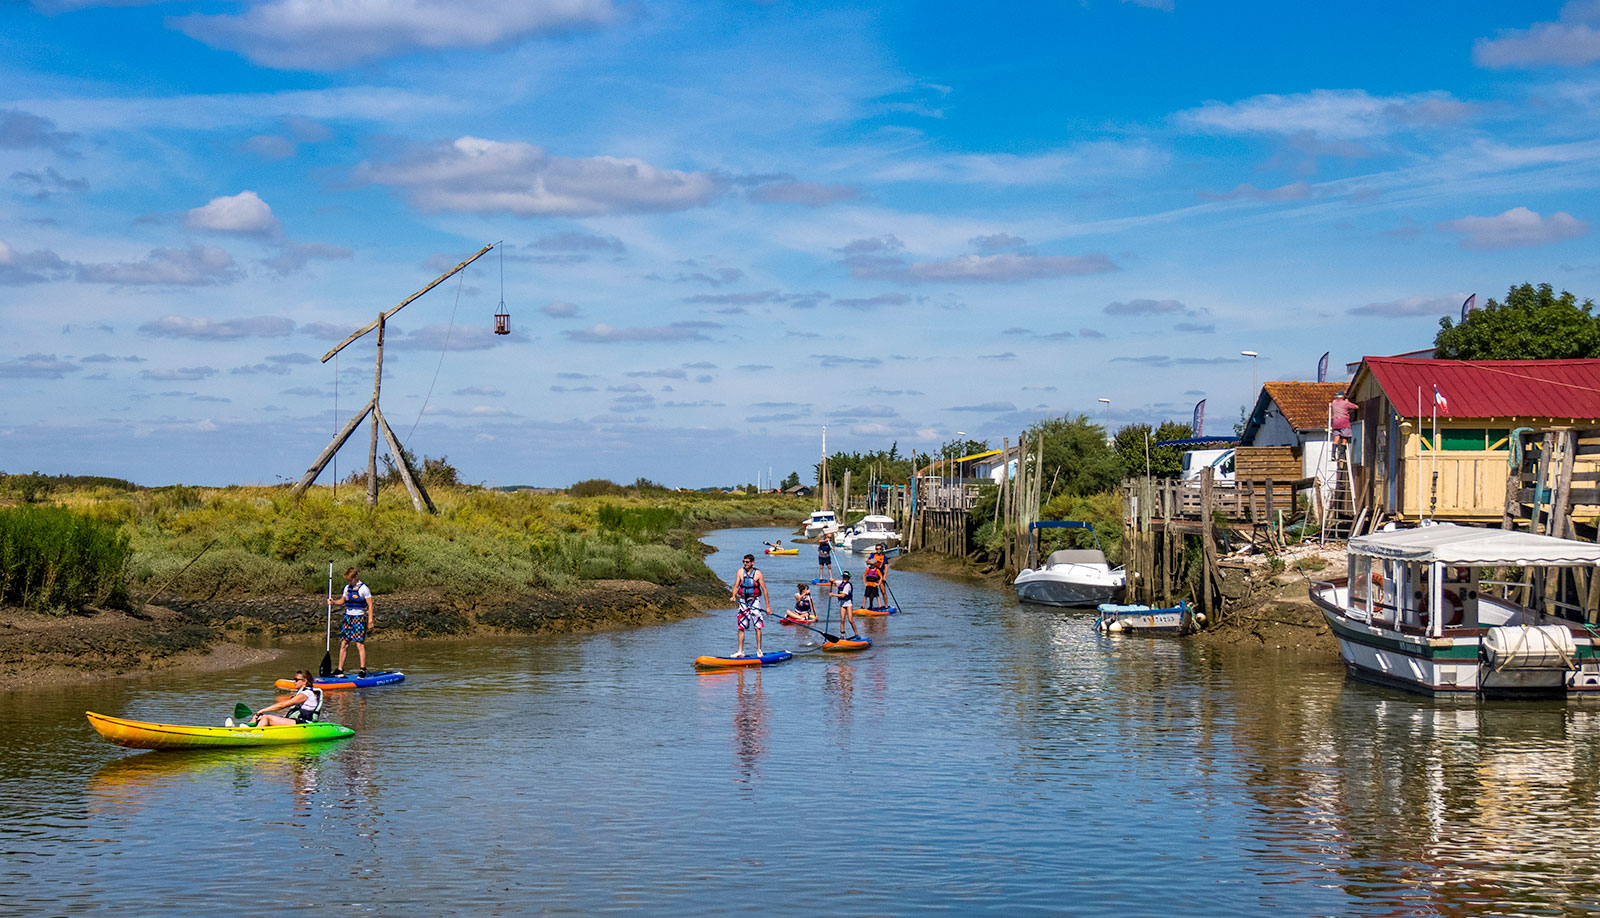 Kayaking on the Mornac-sur-Seudre channel